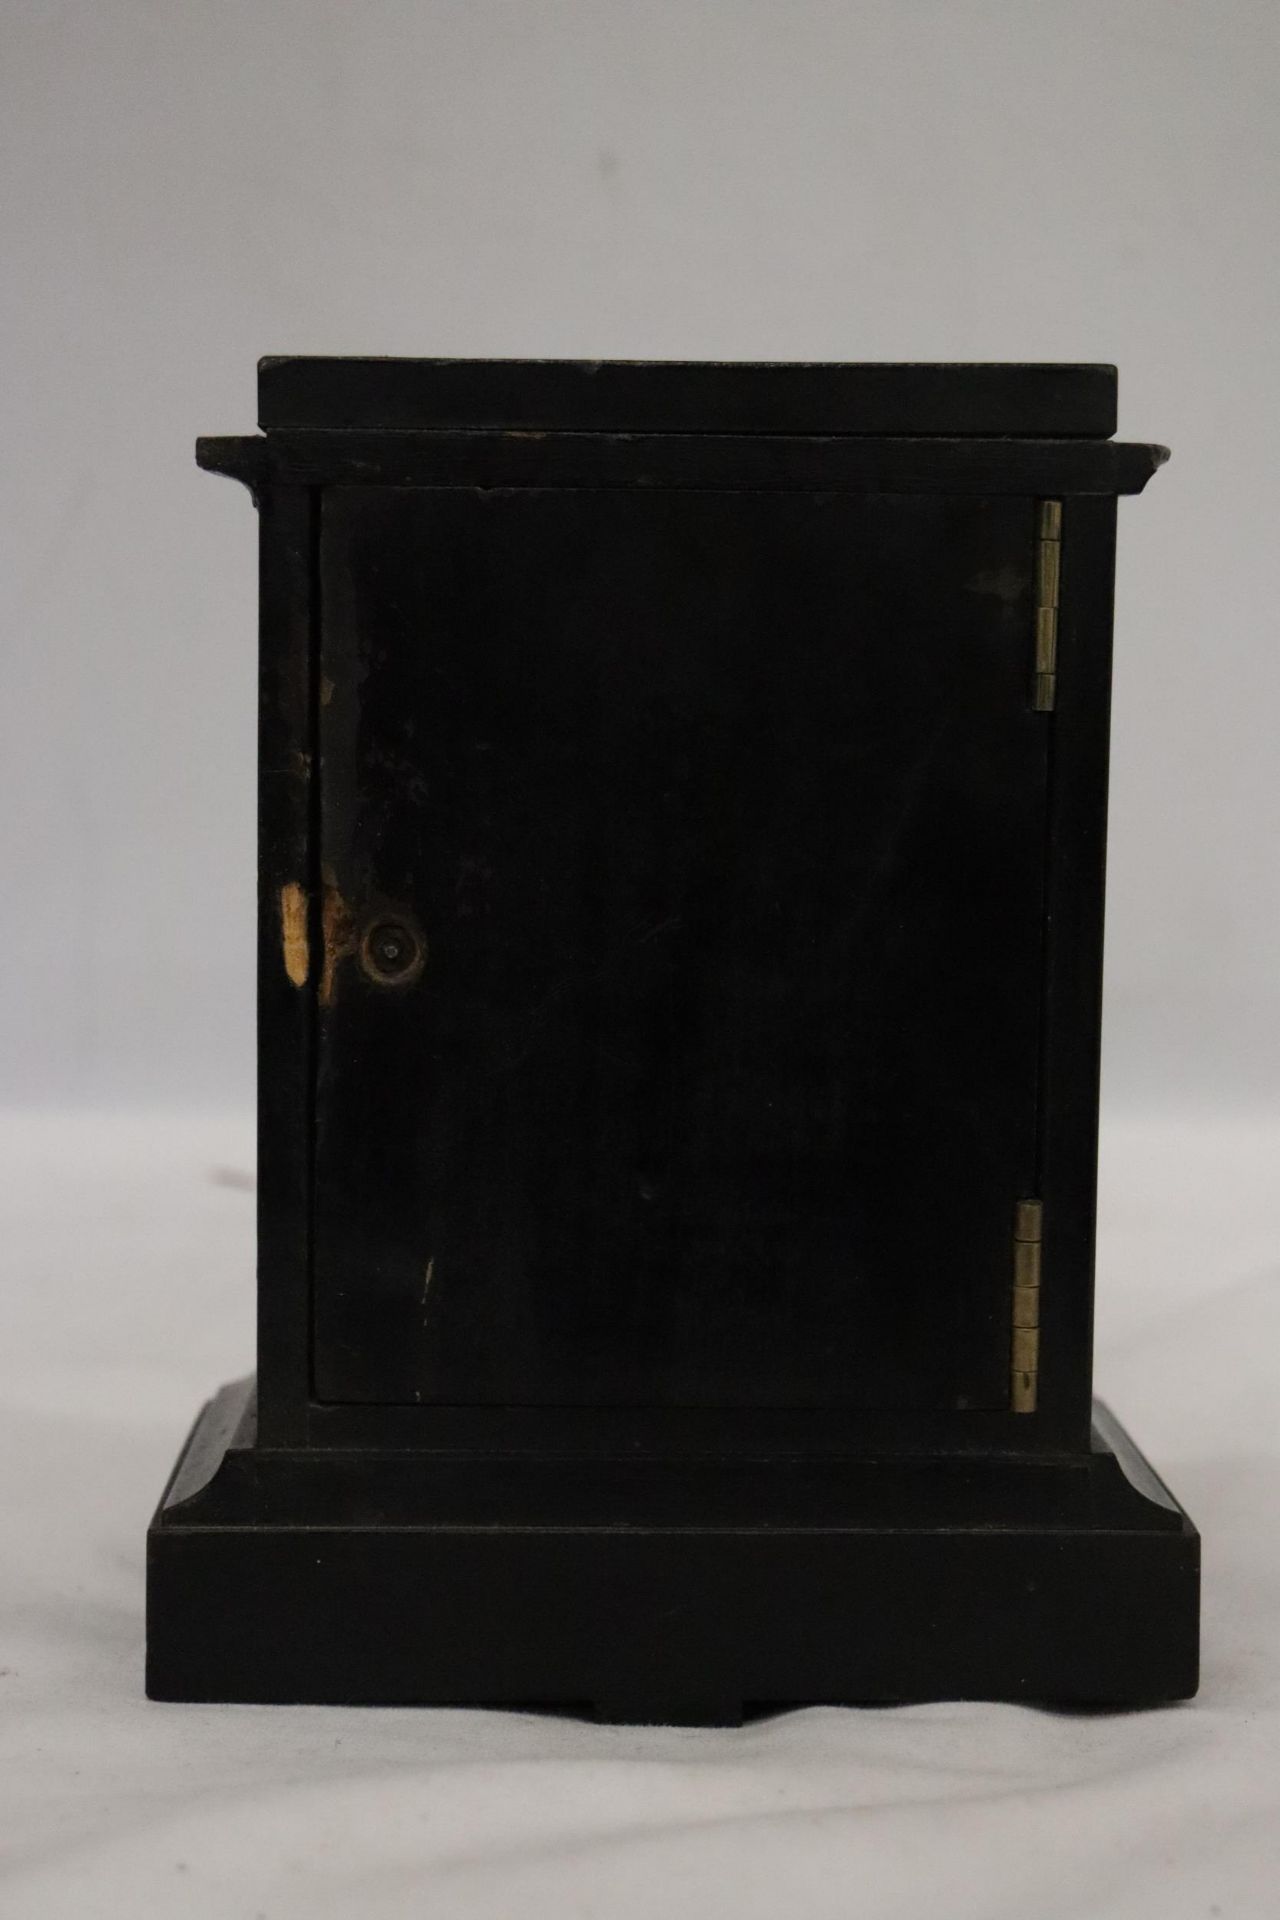 A MID 19TH CENTURY MAHOGANY MANTLE CLOCK THE MOVEMENT SIGNED V.A.P. BREVETTE S.G.D.G NO 653 - Image 3 of 7